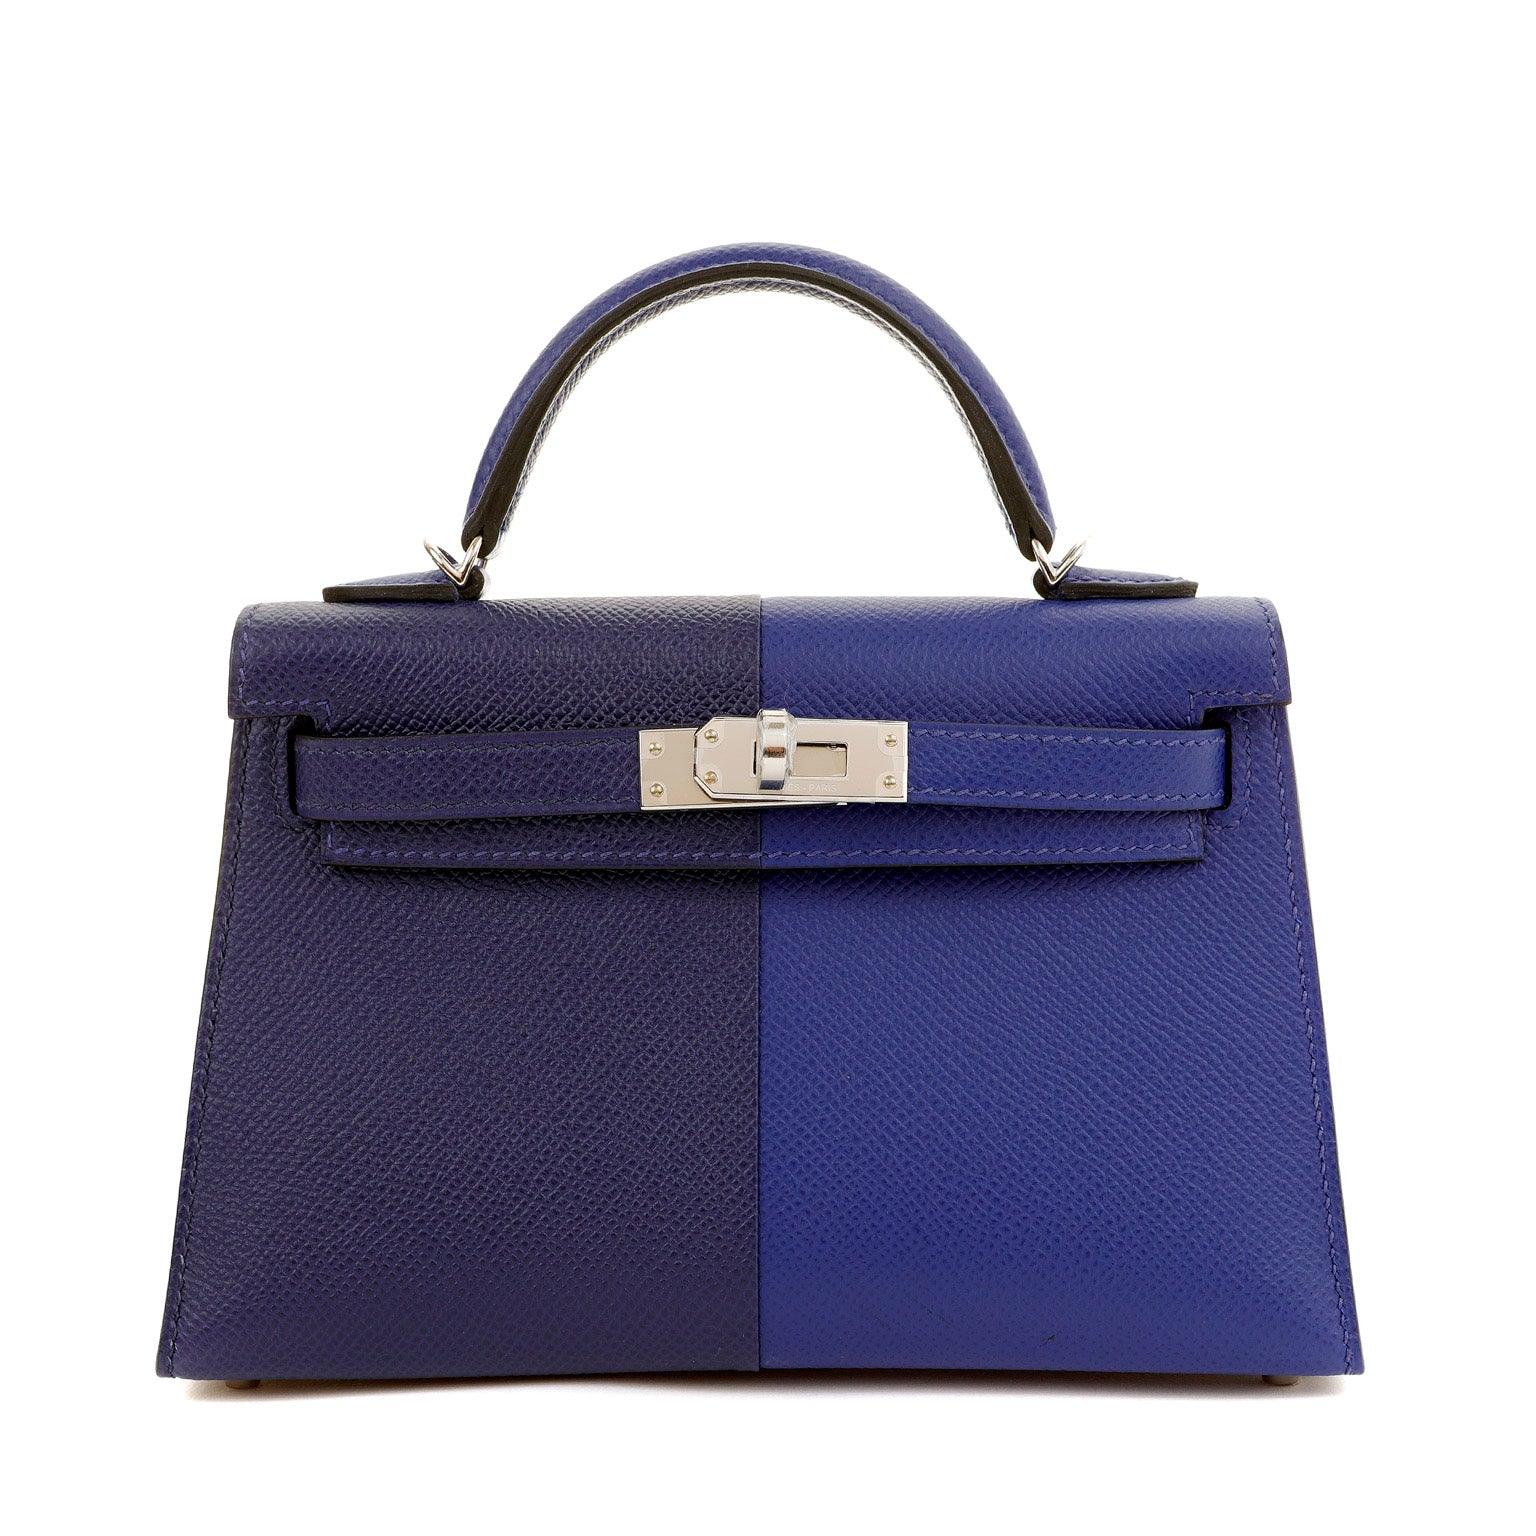 Get your hands on this stunning, limited edition Hermès 20cm Blue Bi Color Mini  Kelly bag – Only Authentics